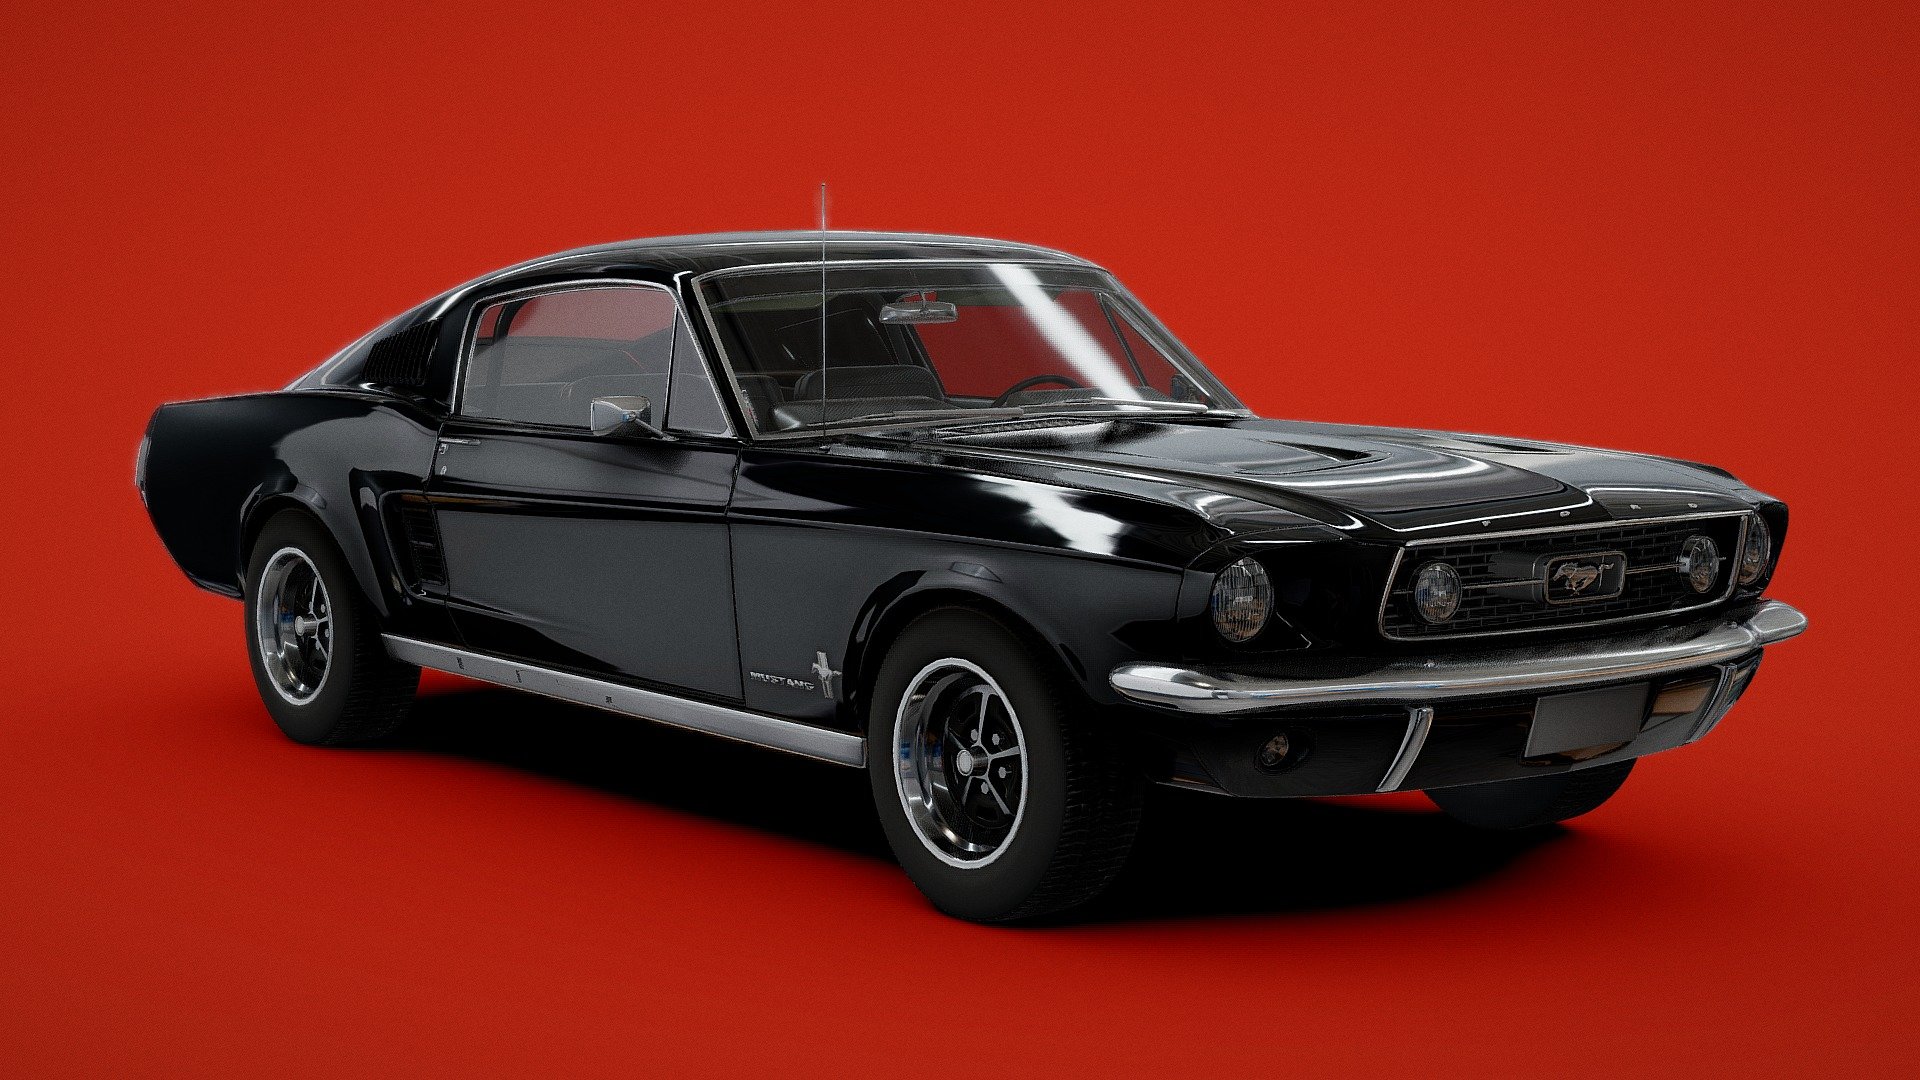 Ford Mustang Fastback 1967
.

HIGH END / high poly / fully editable / rigable / interiour

by getting this model you have full control on meshes and materials

you can even subdivide or unsubdivide all parts for having better look by your needs.

.

**don't forget to like and share your thoughts!! 🍻 .

.

you can support me by folowing me on instagram

my ig: ZIRODESIGN - Ford Mustang Fastback 1967 - Buy Royalty Free 3D model by ZIRODESIGN 3d model